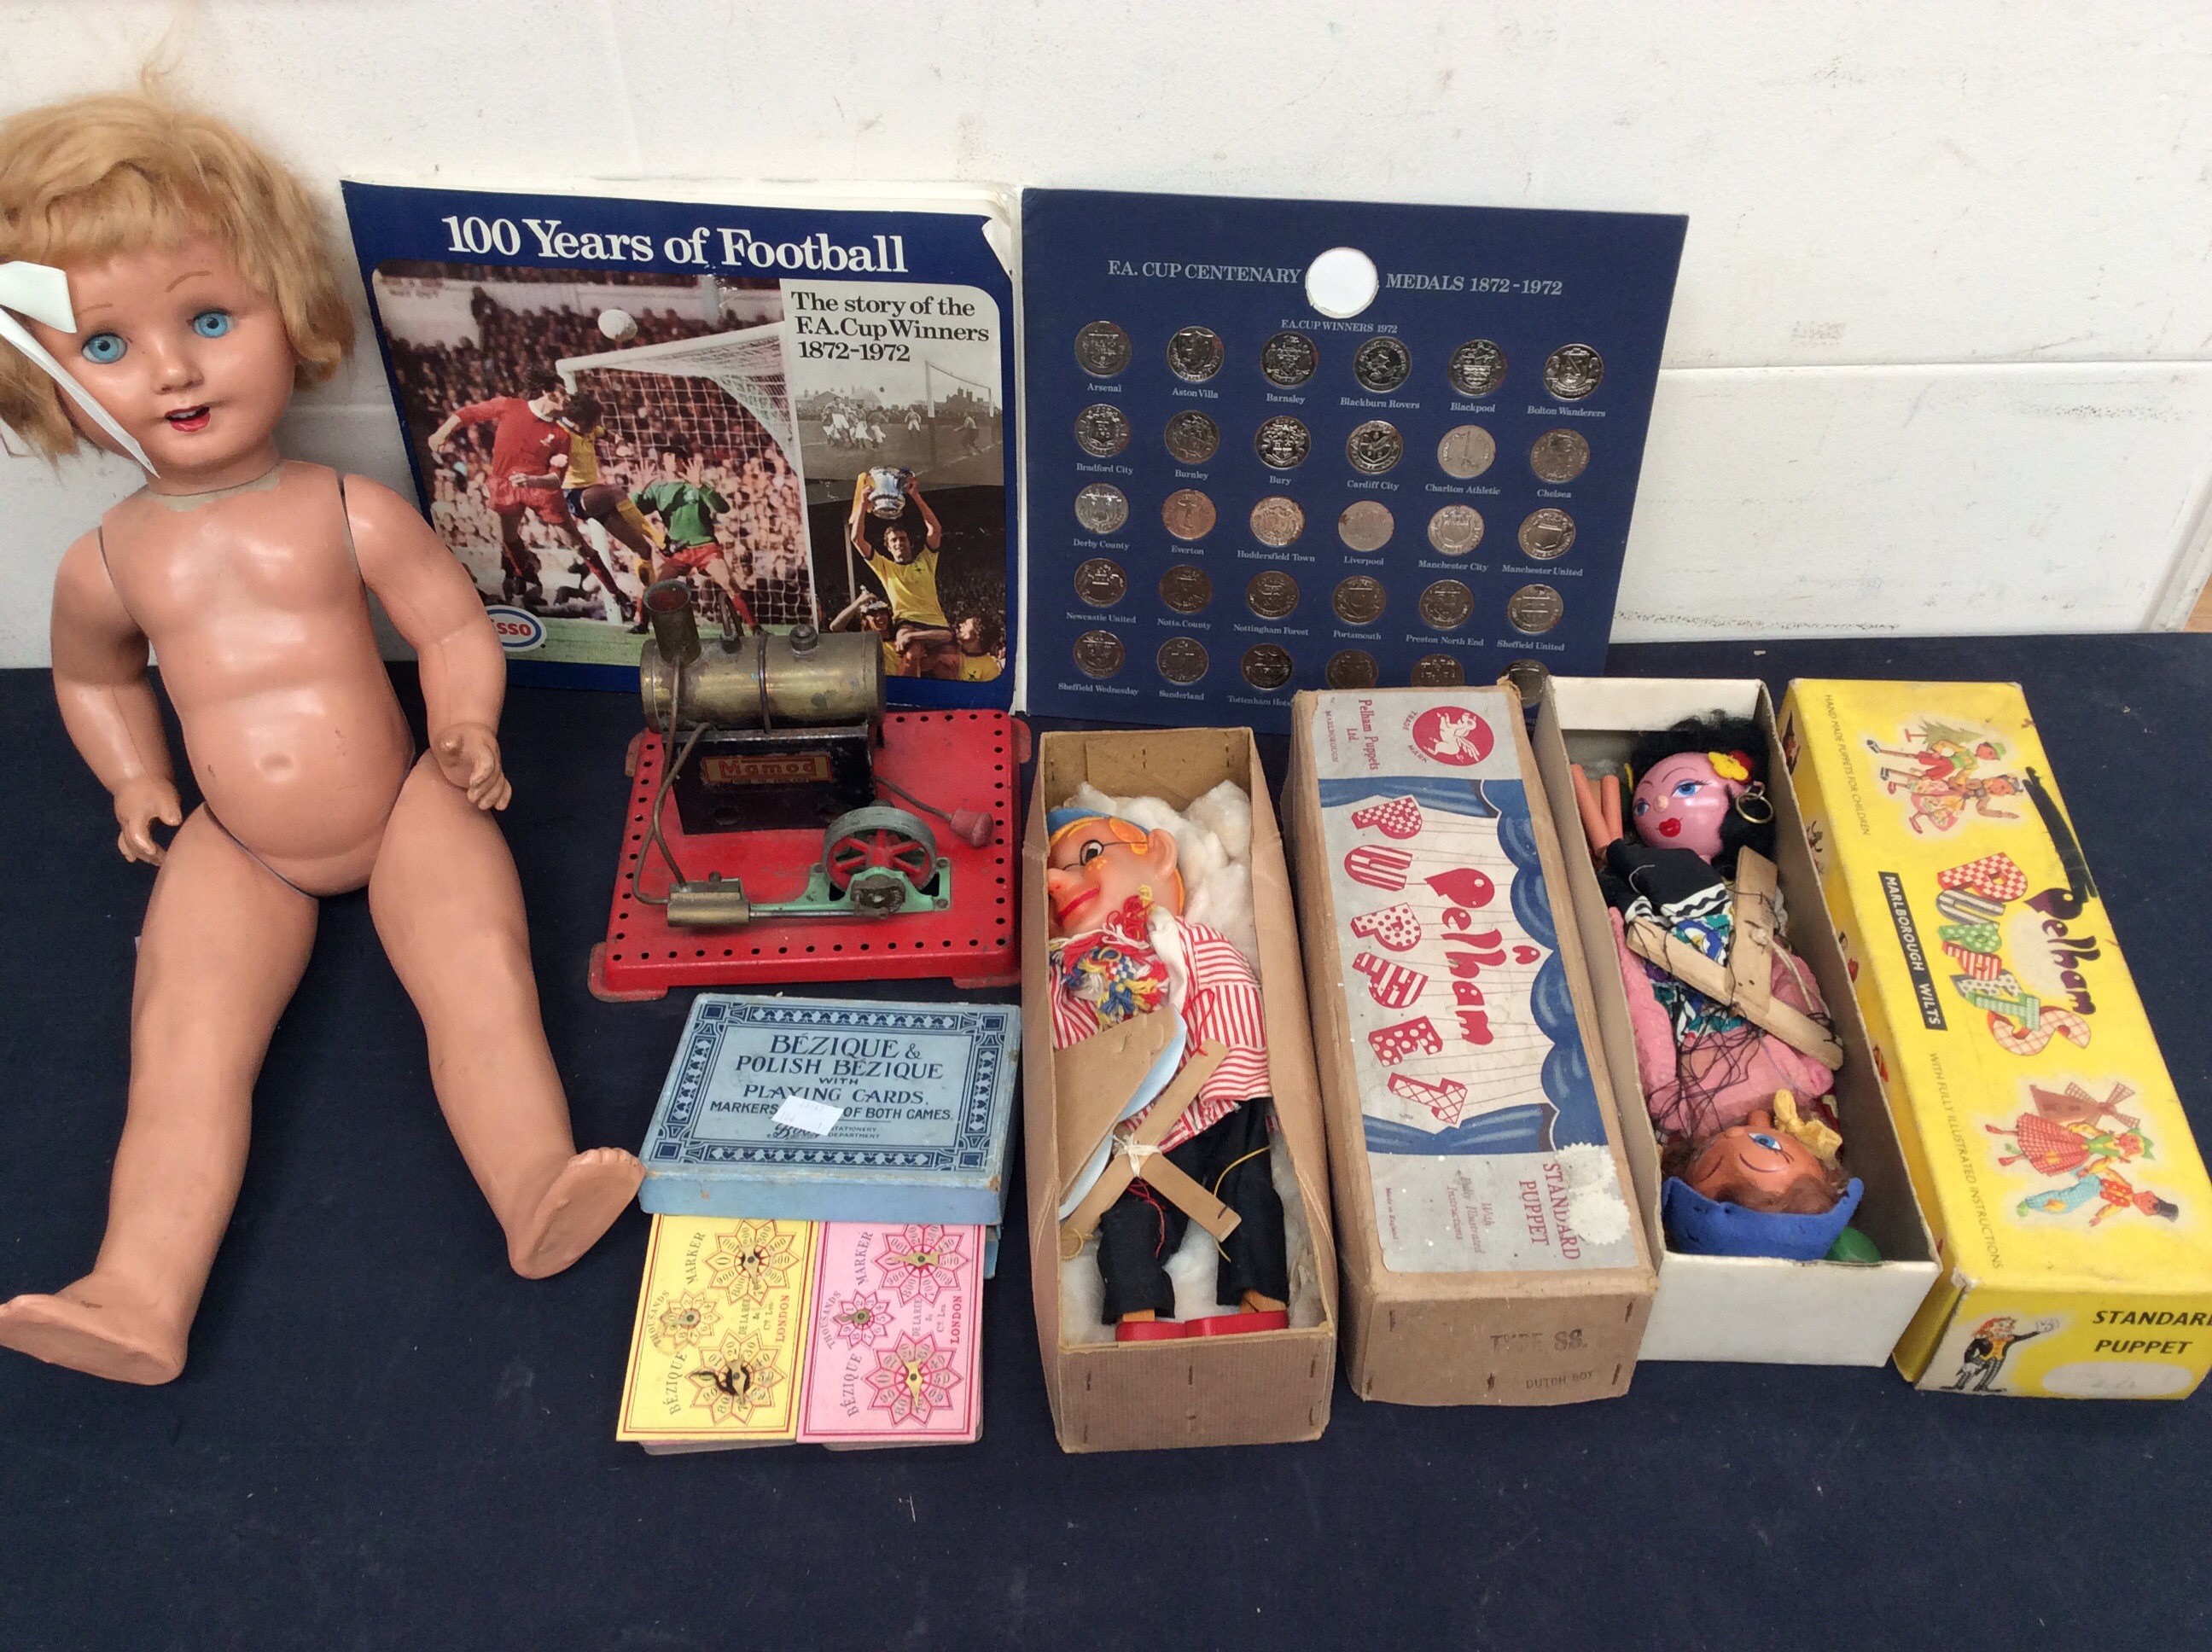 Three Pelham boxed puppets, Mamod steam engine doll and card game.